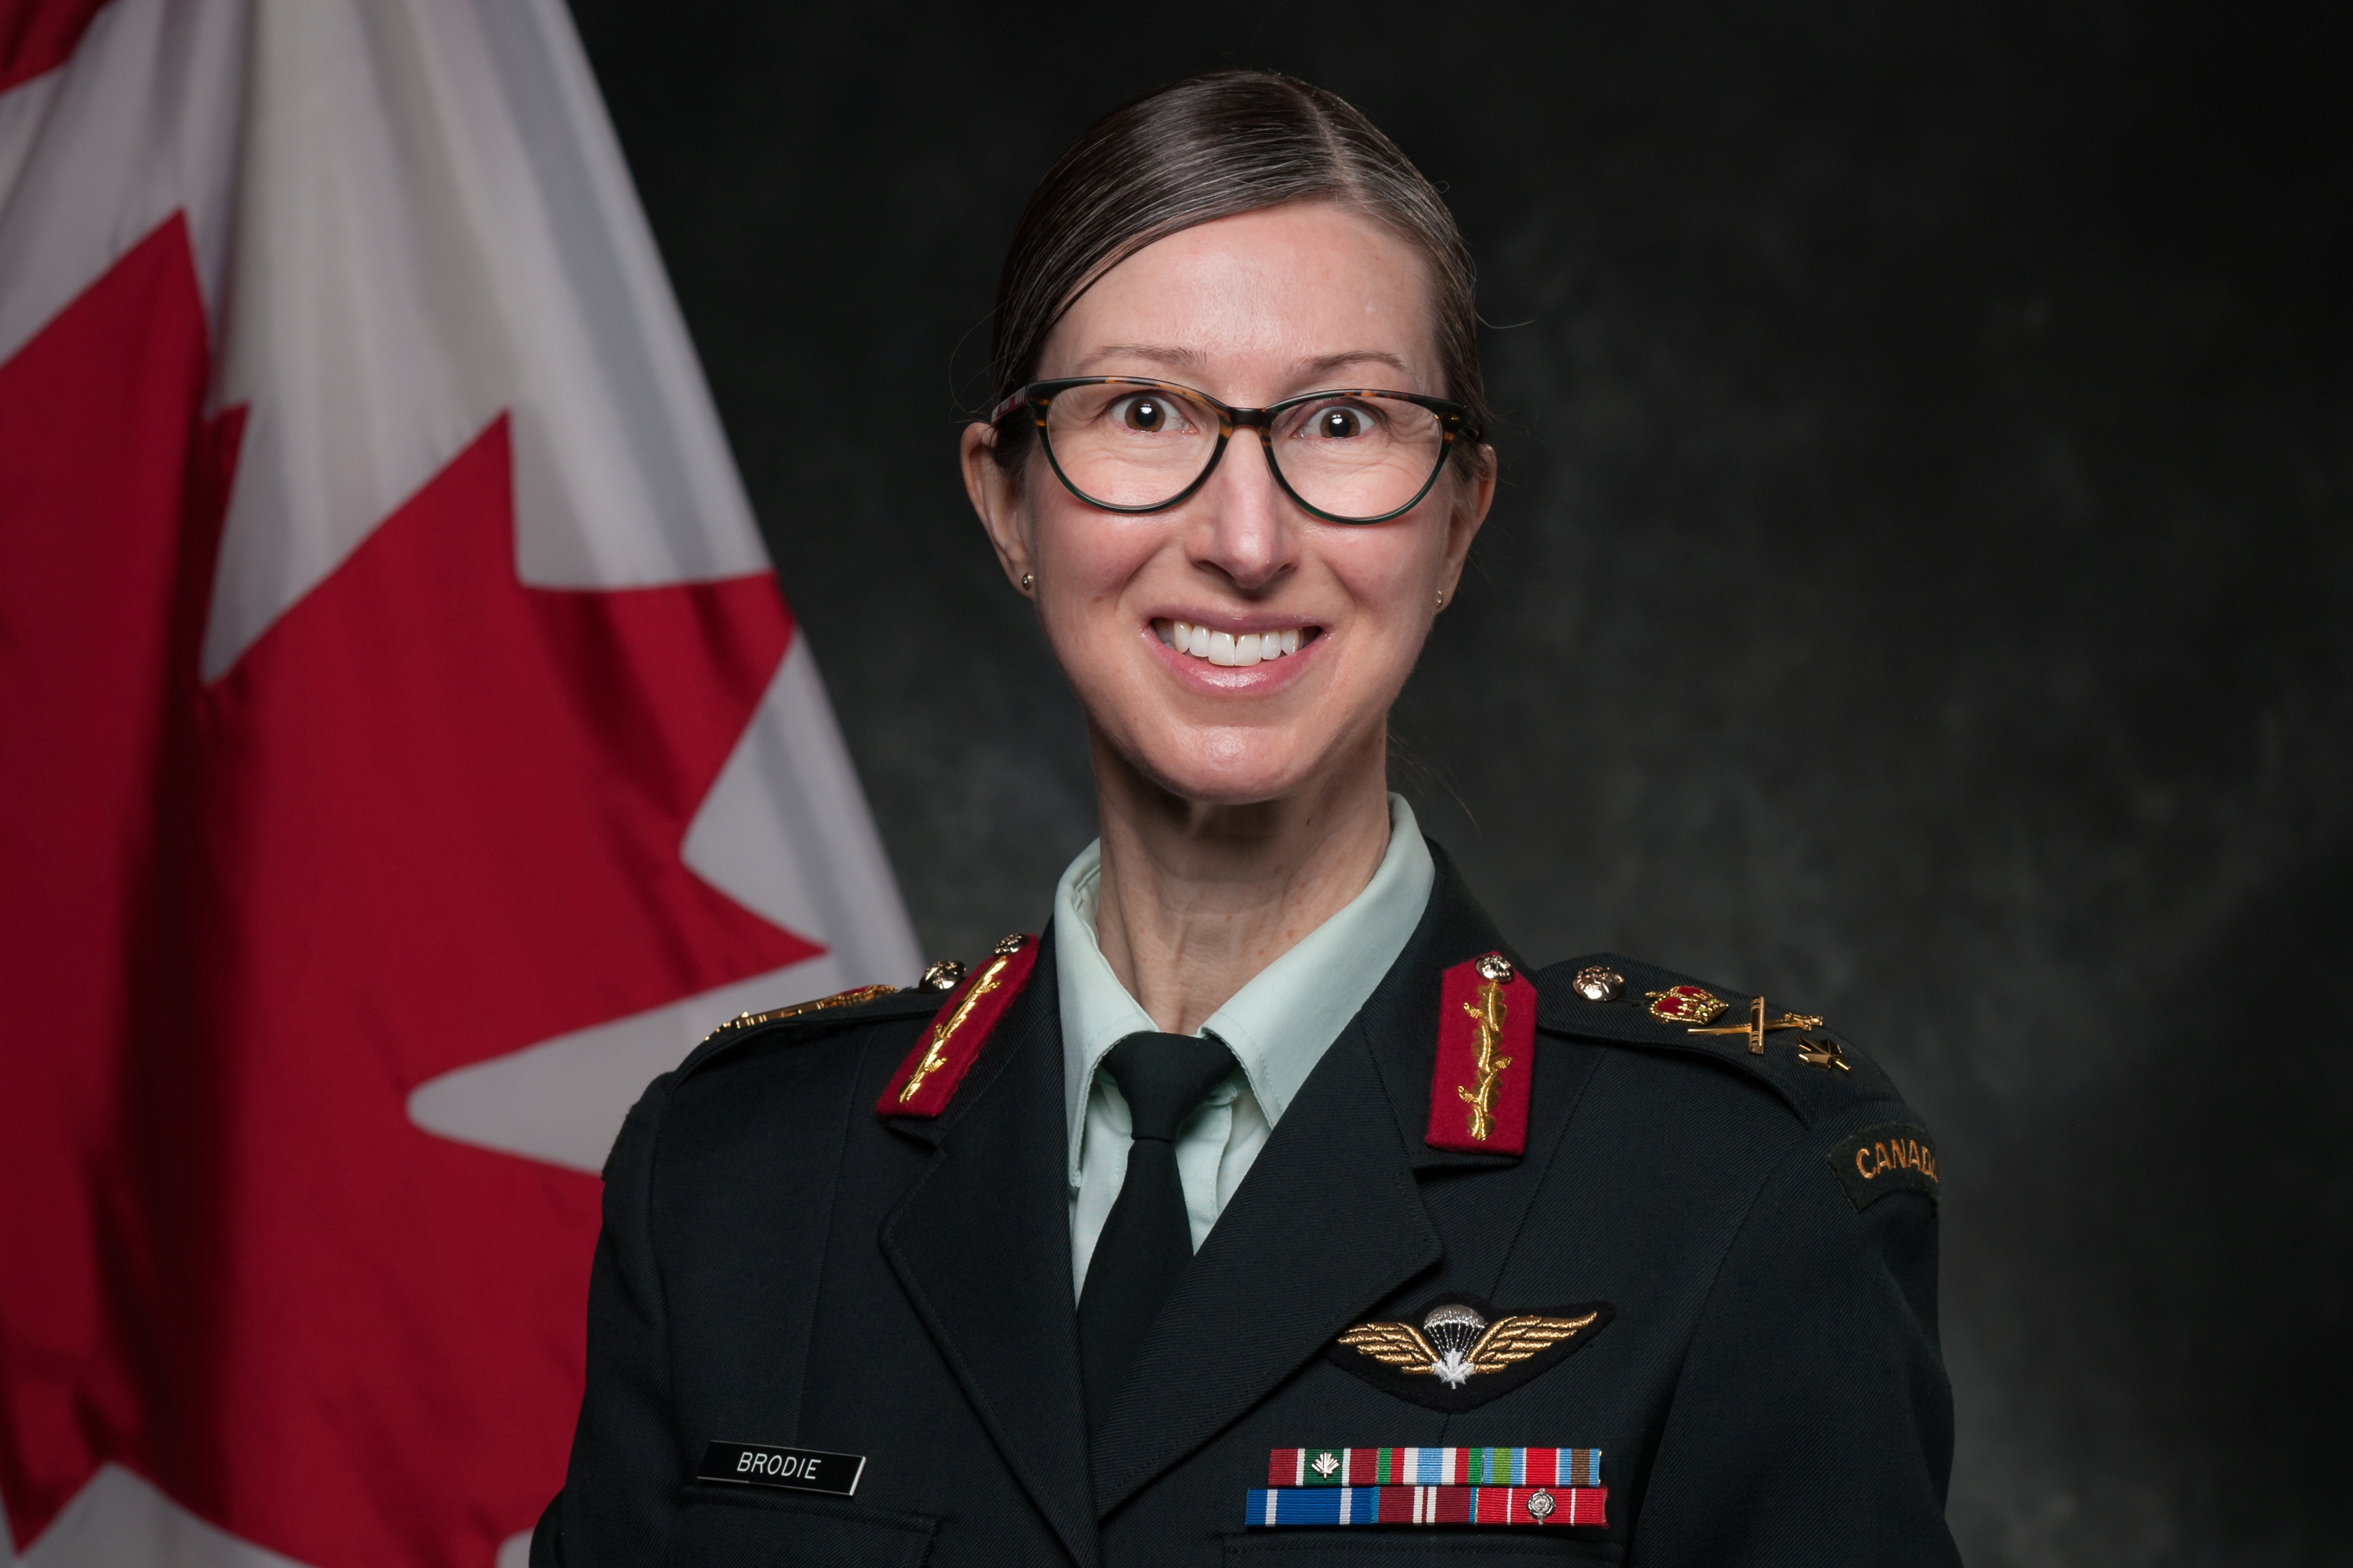 Canadian Armed Forces Brigadier-General Krista Brodie poses in an undated photograph